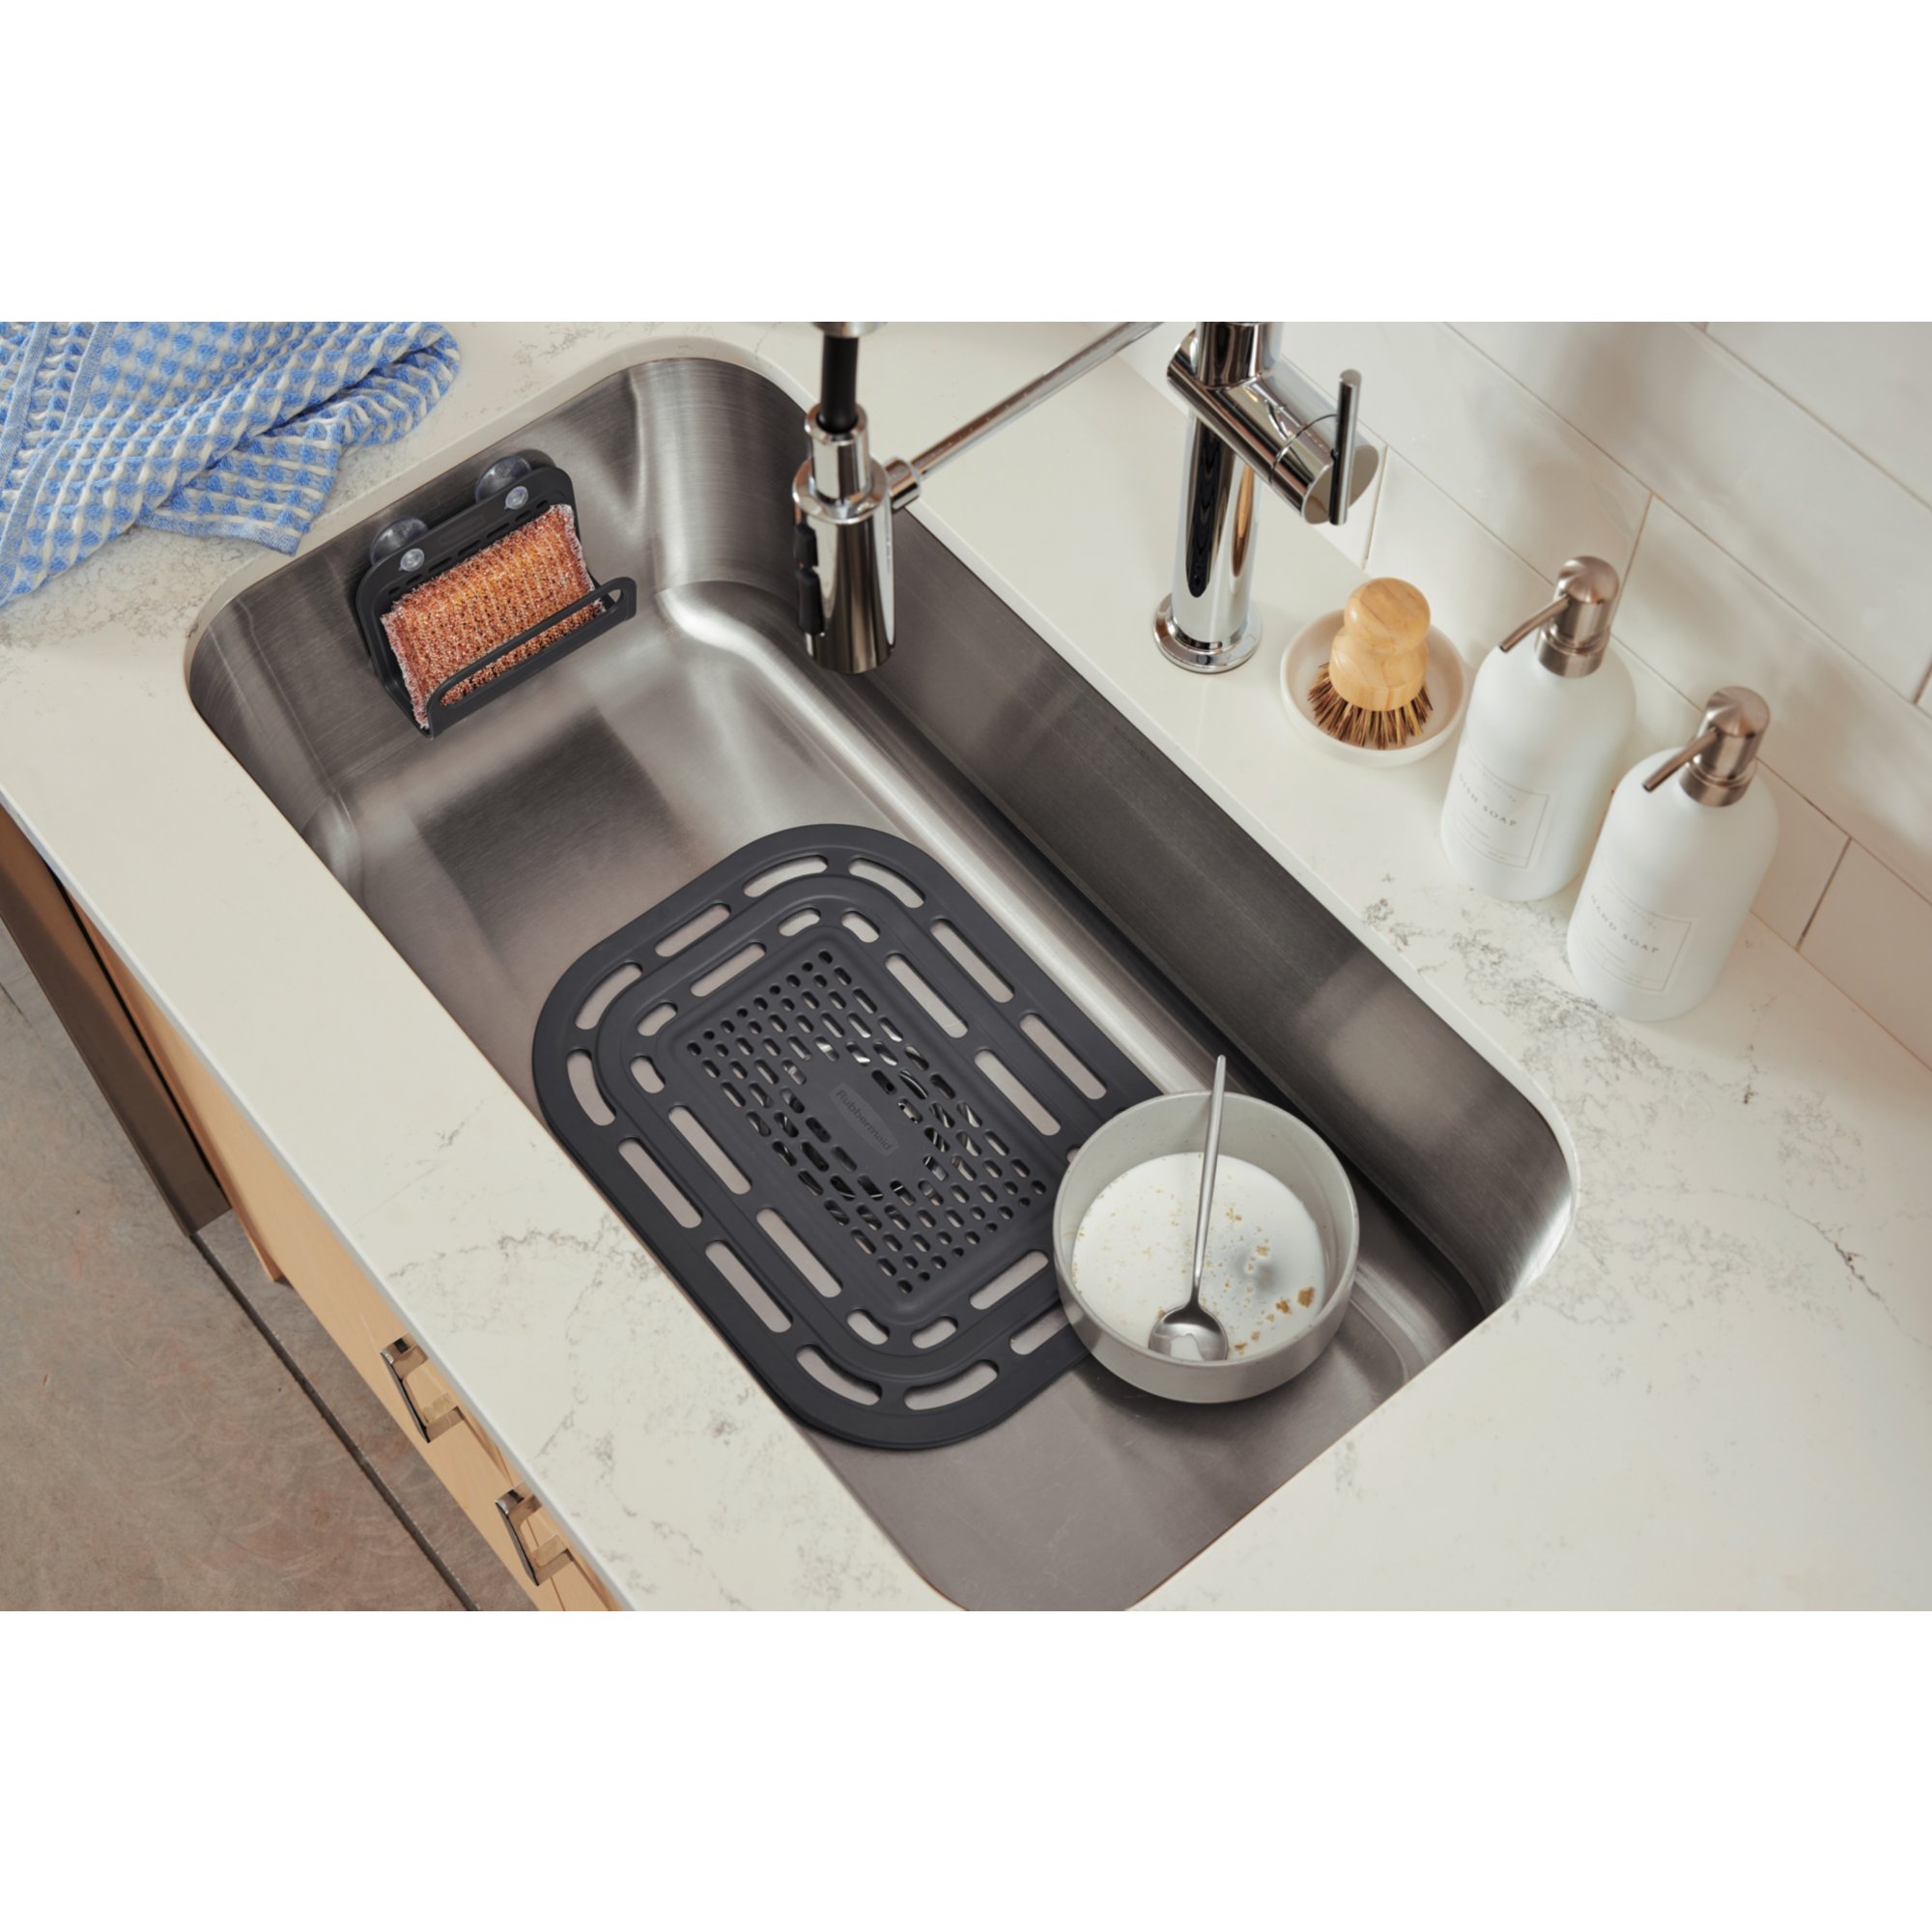 Rubbermaid Small Black Sink Protector